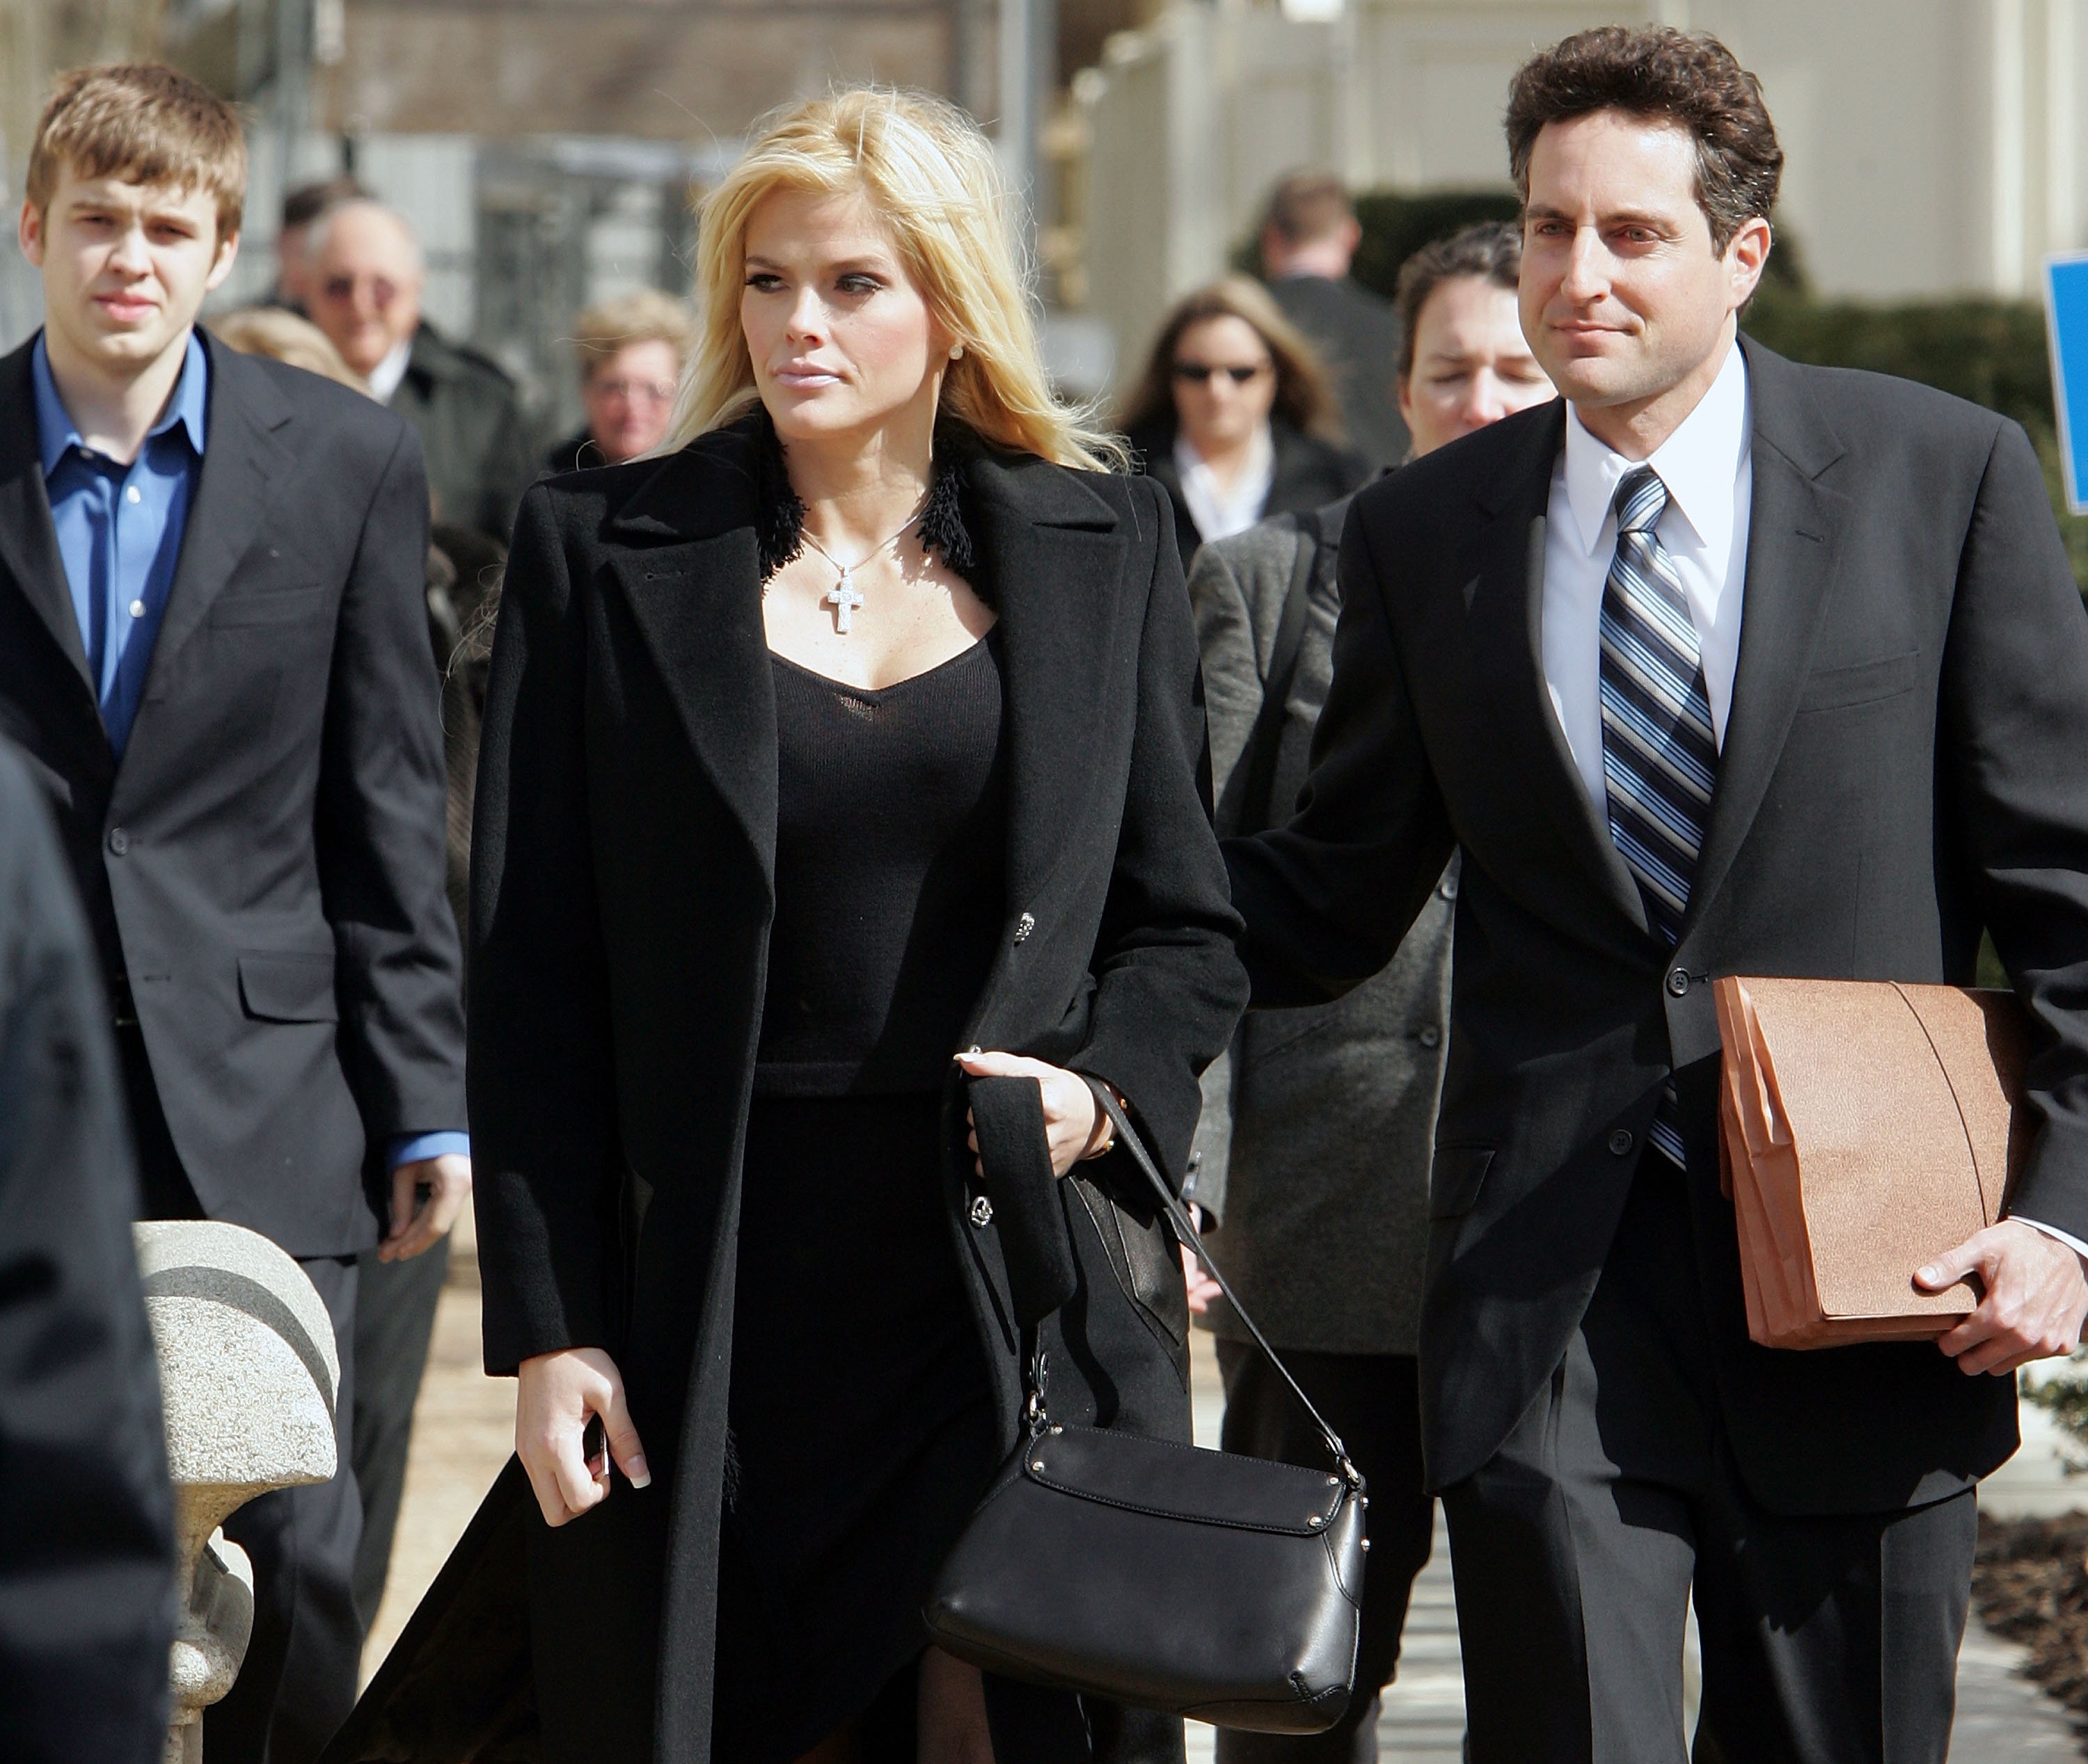 Anna Nicole Smith and Howard Stern at the U.S. Supreme Court on February 28, 2006, in Washington | Source: Getty Images